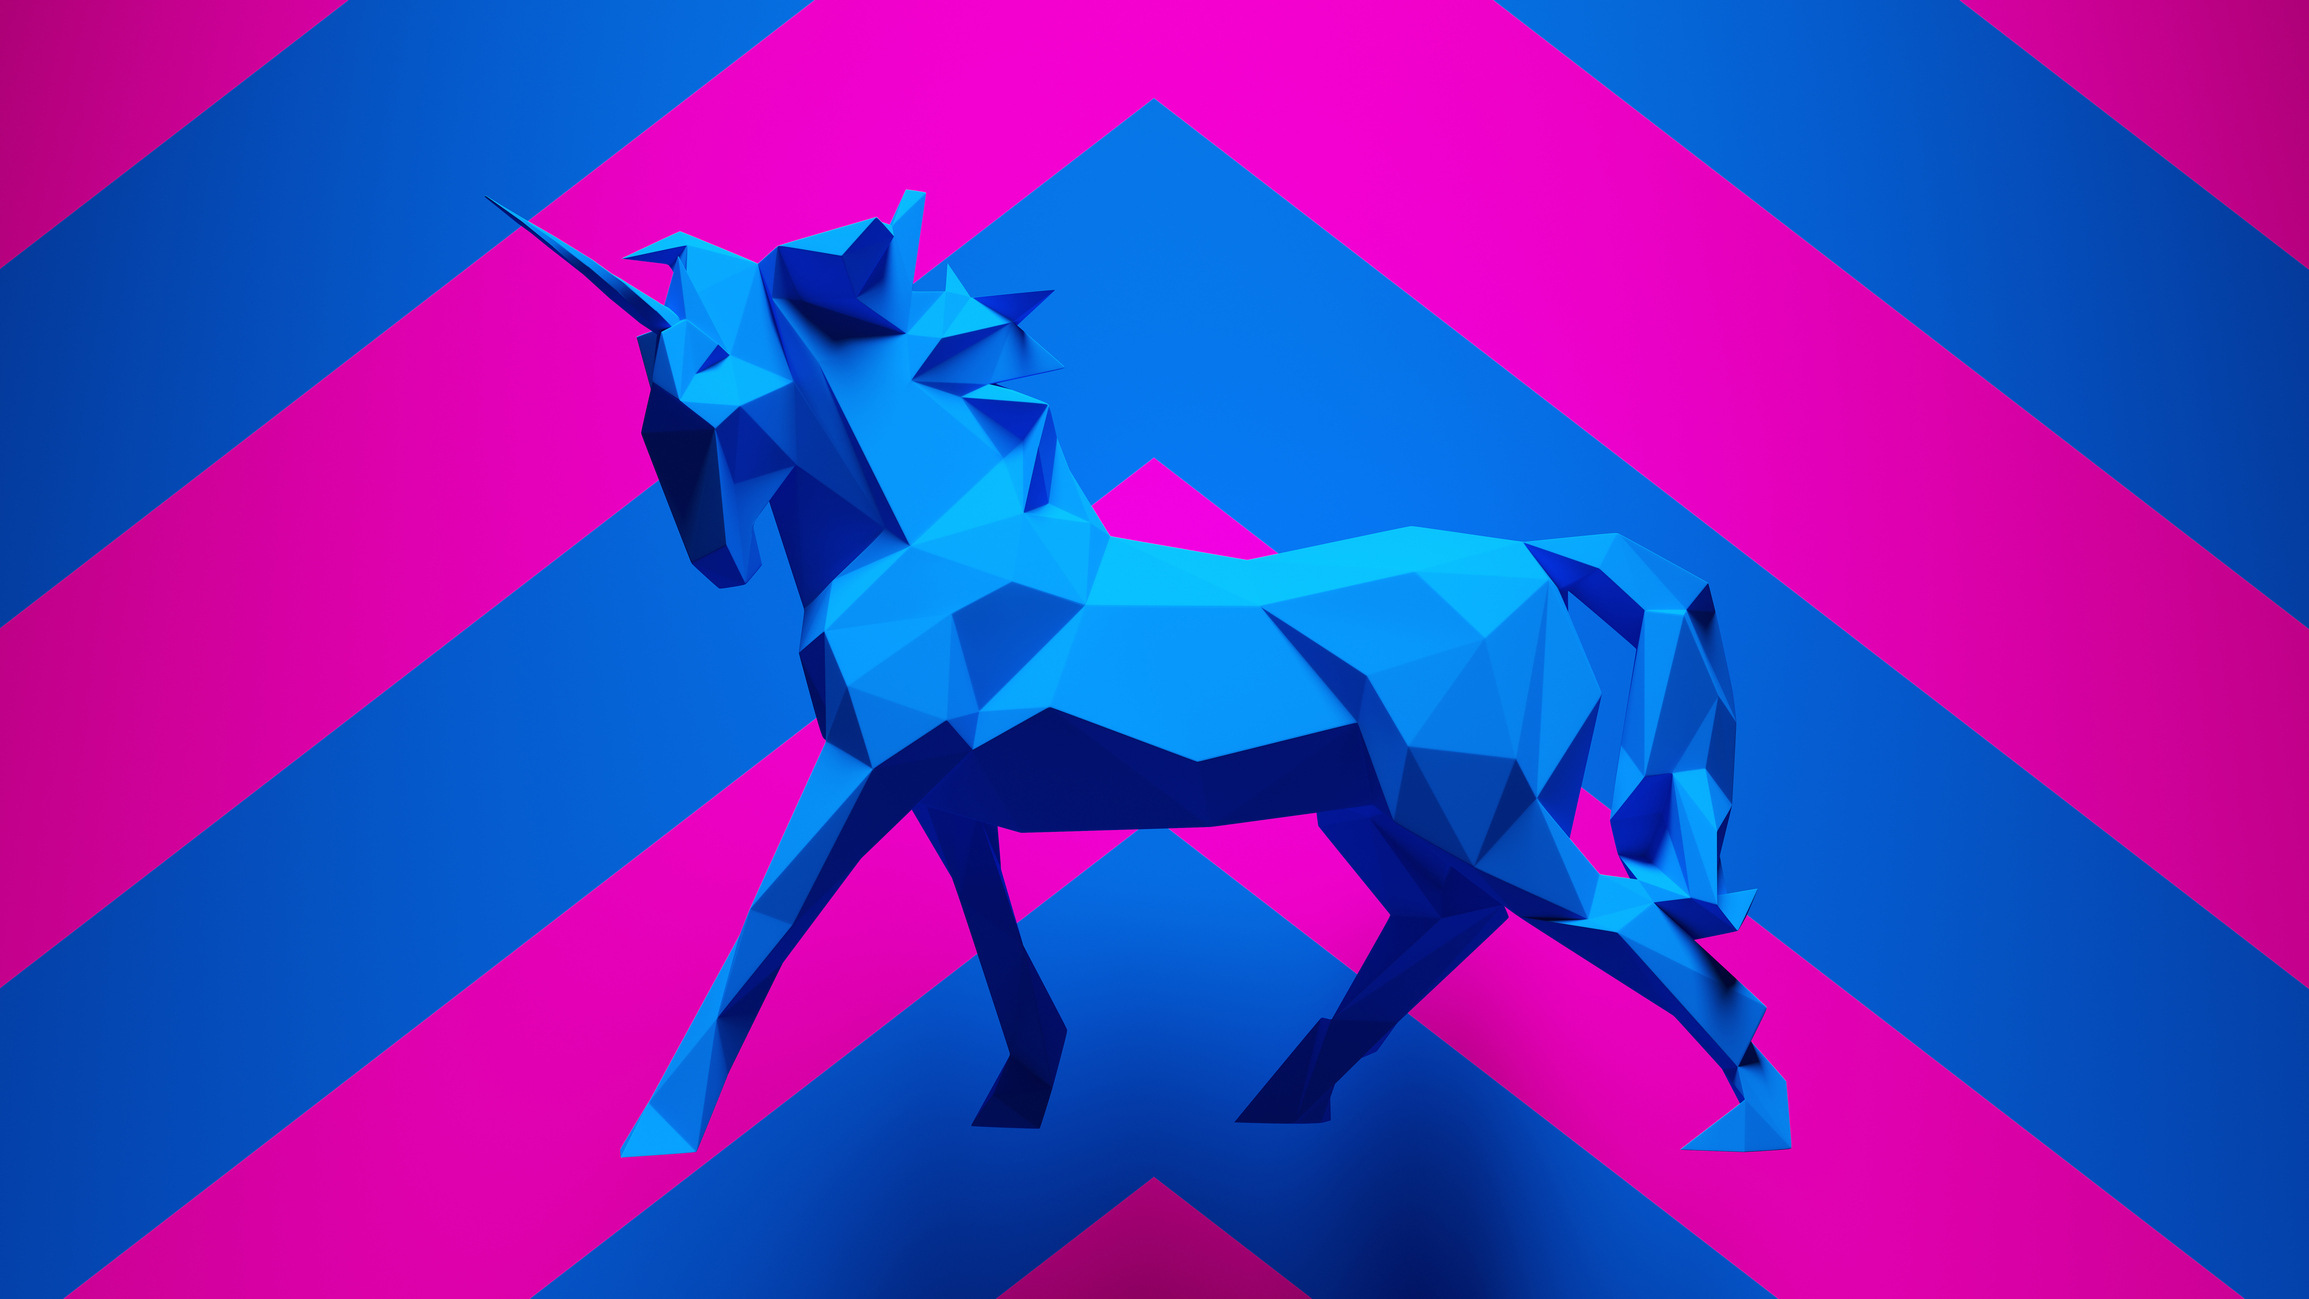 Credit: Getty Images unicorn horse on a blue and pink chevron background, illustration